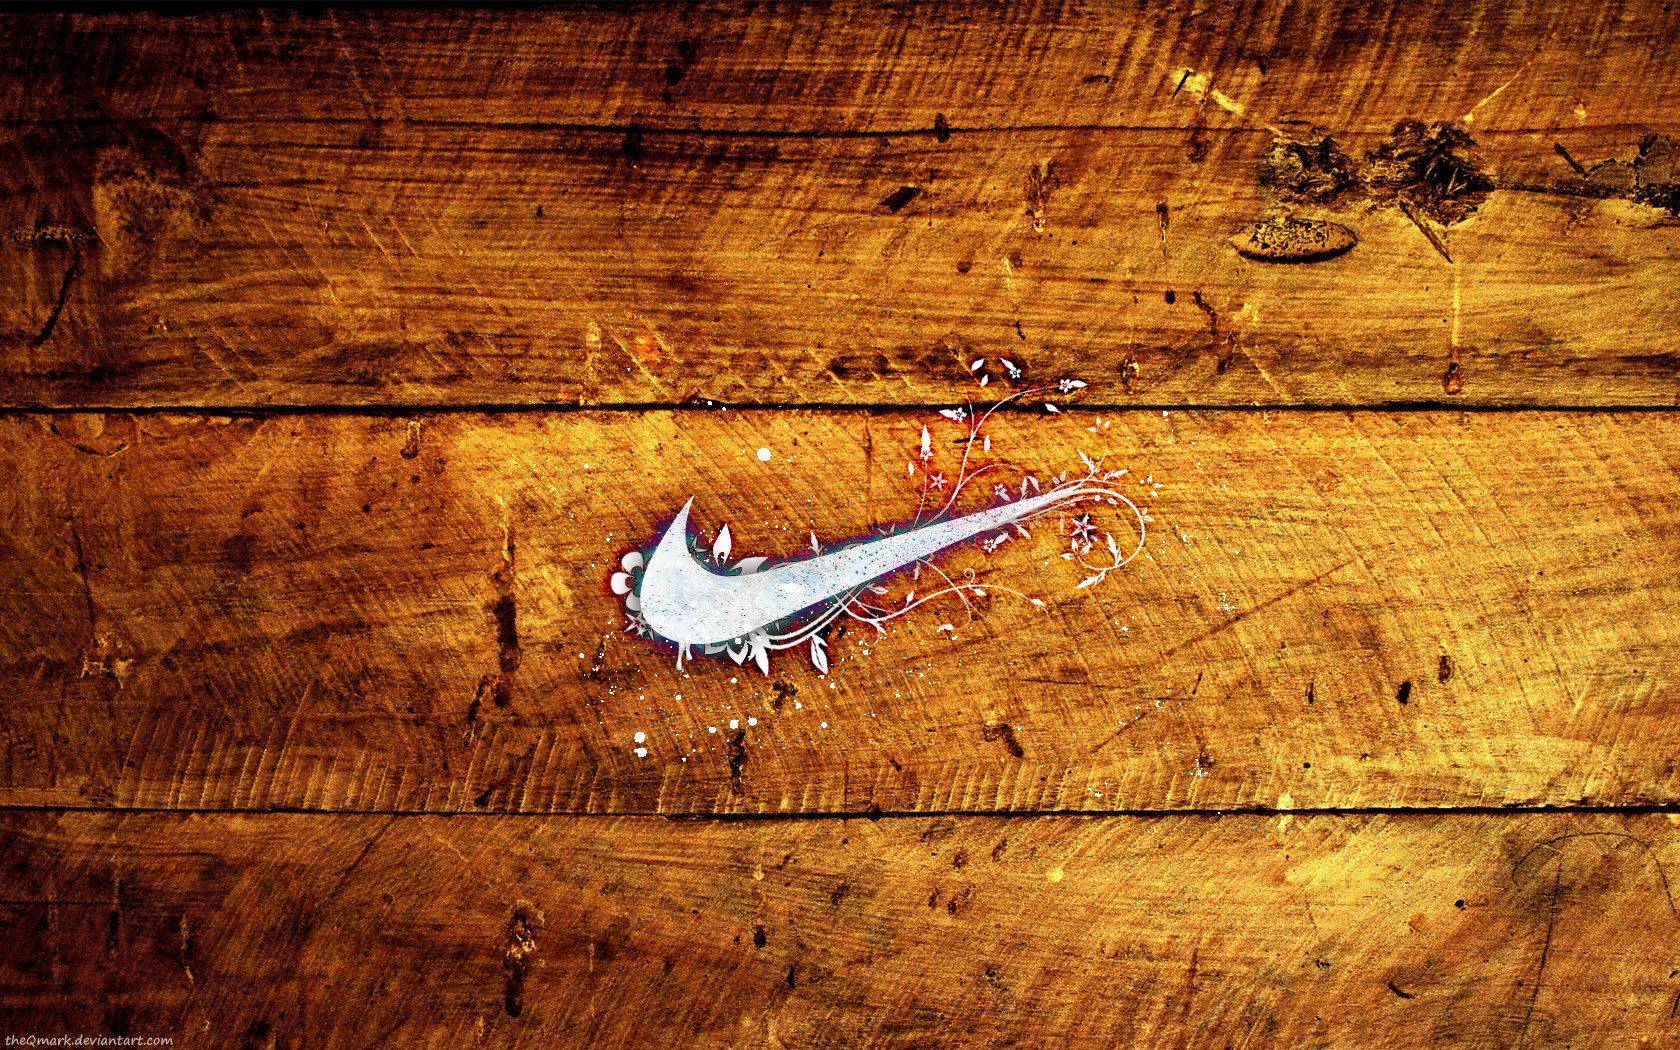 Nike One Wallpapers